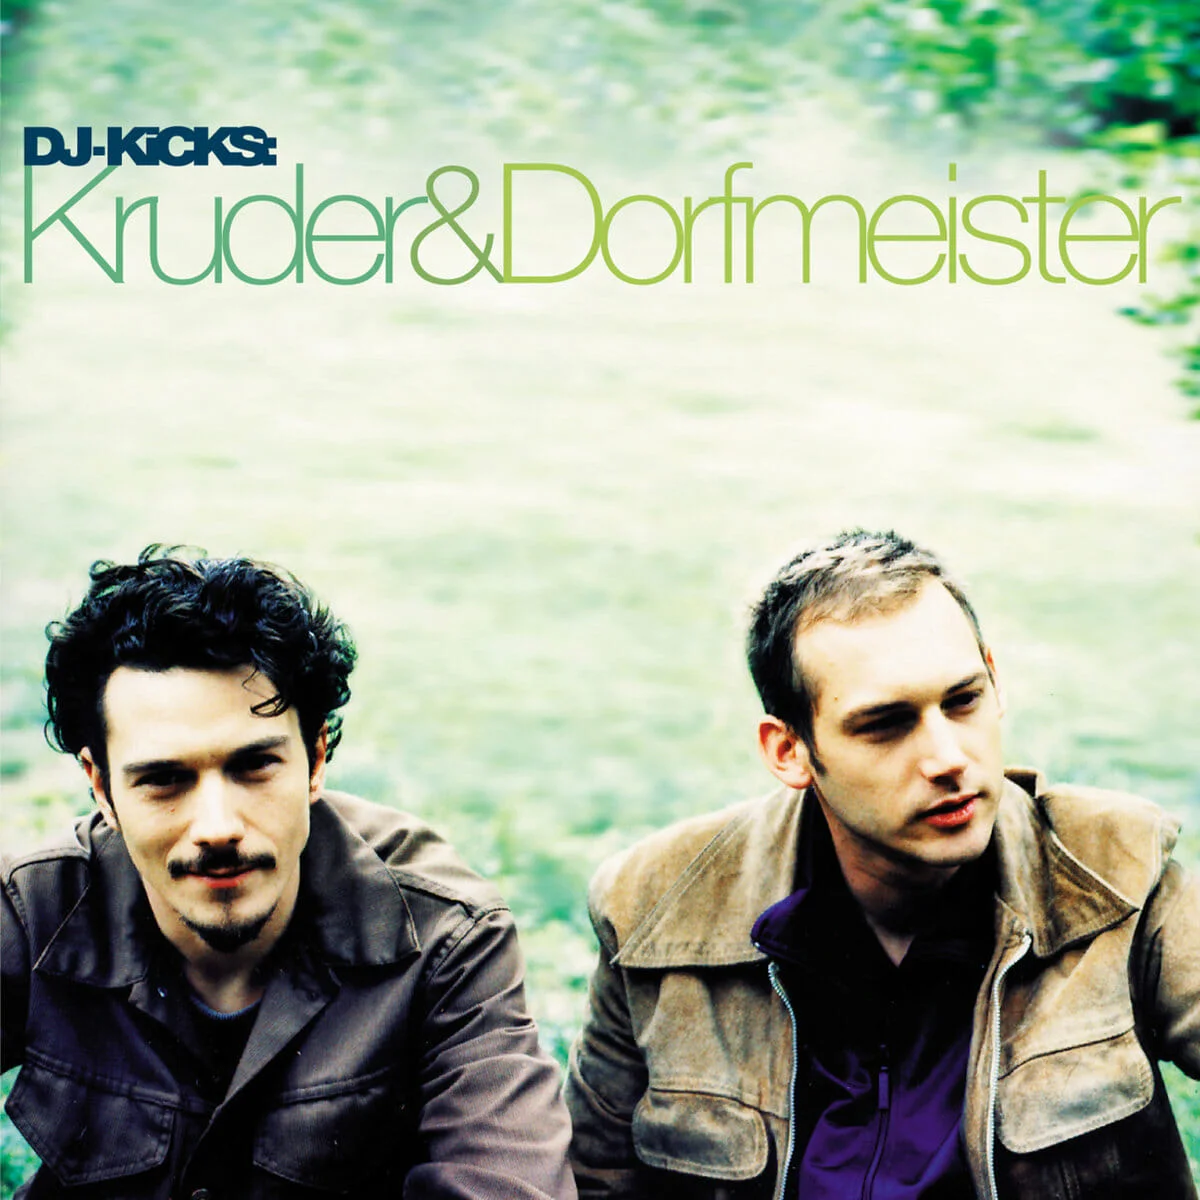 You are currently viewing Kruder & Dorfmeister Part 2 THE LIGHT (E3)